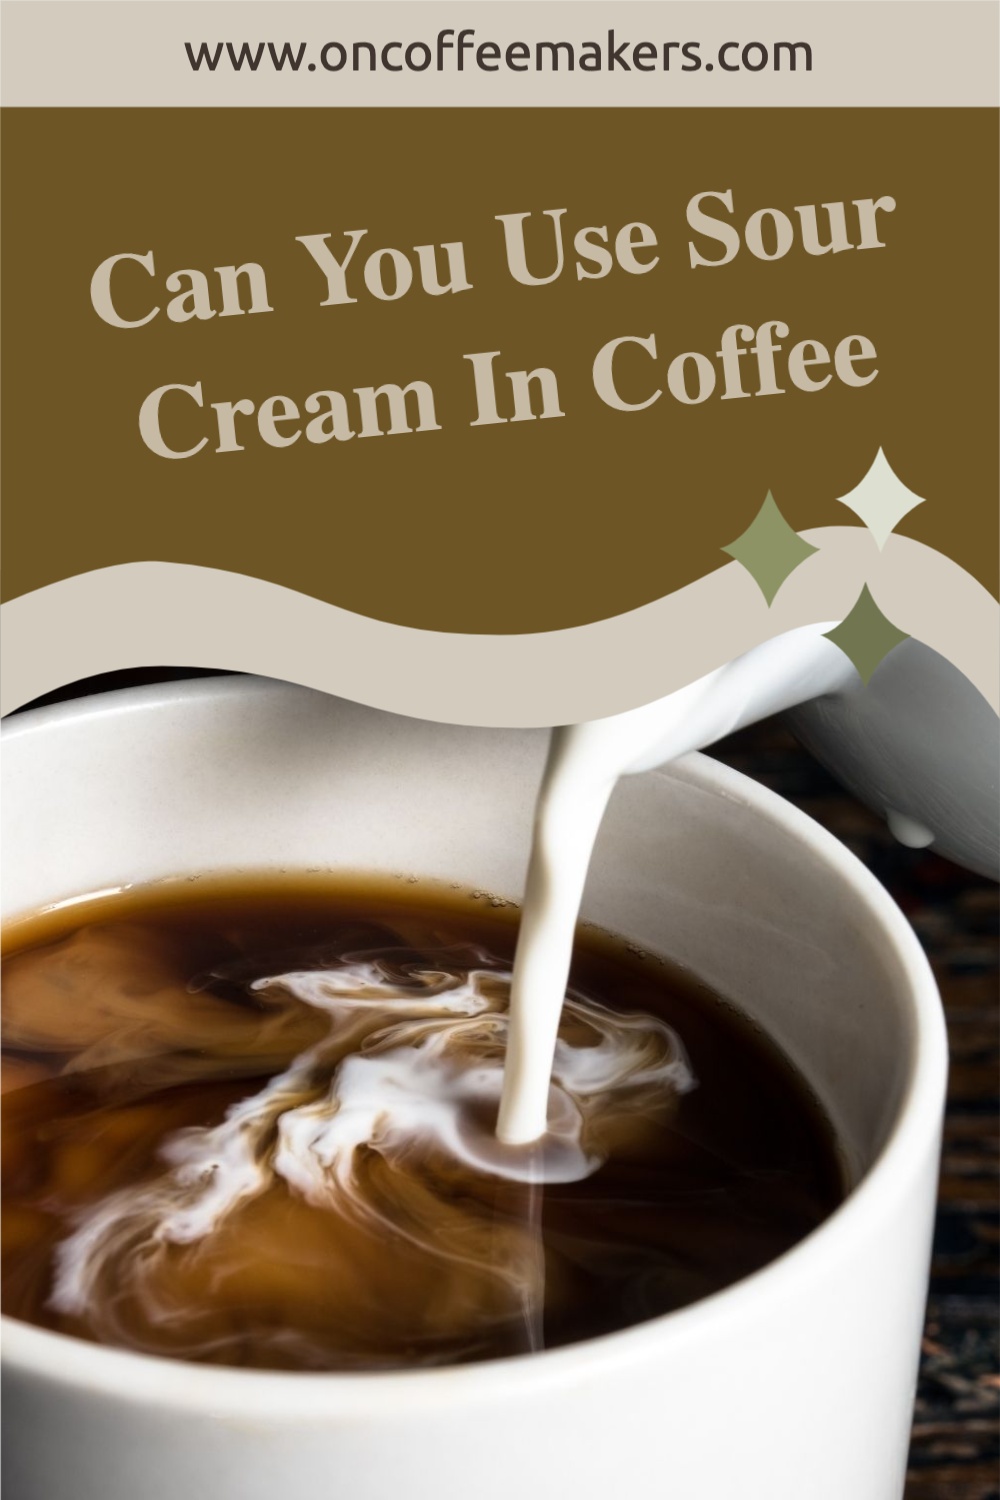 Can-You-Use-Sour-Cream-In-Coffee.jpg